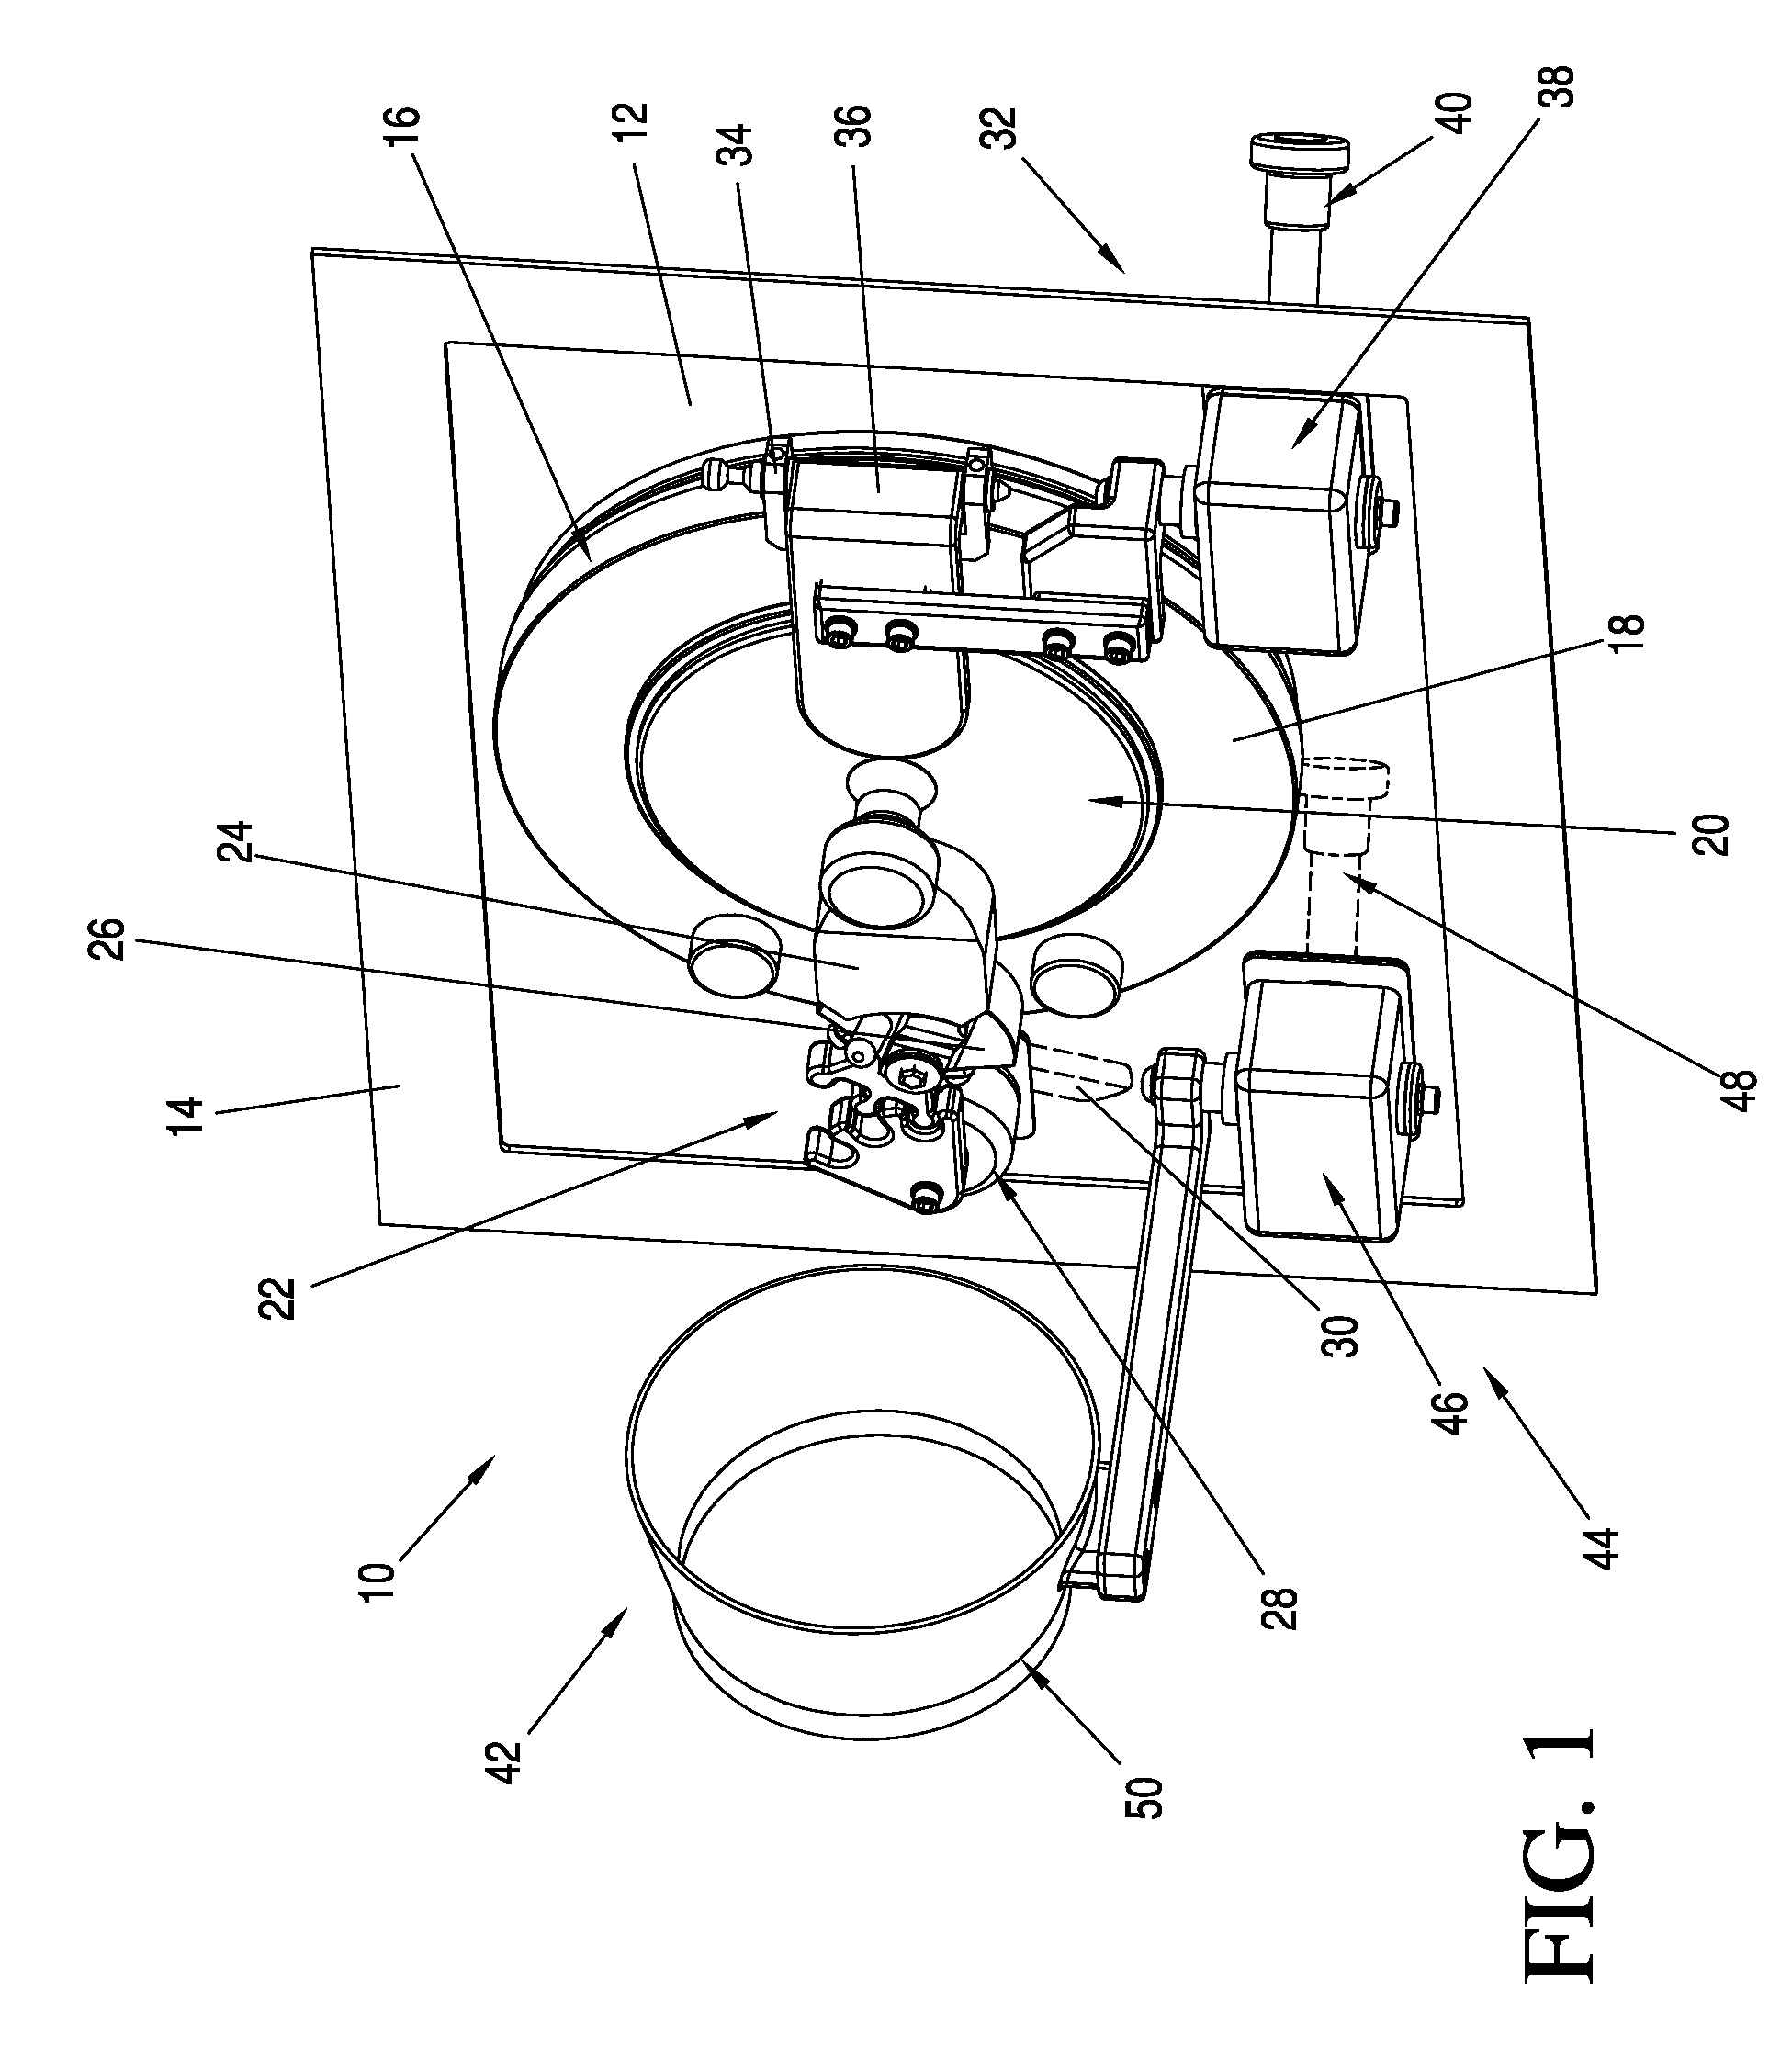 Externally operated alpha port system for use with a rapid transfer port